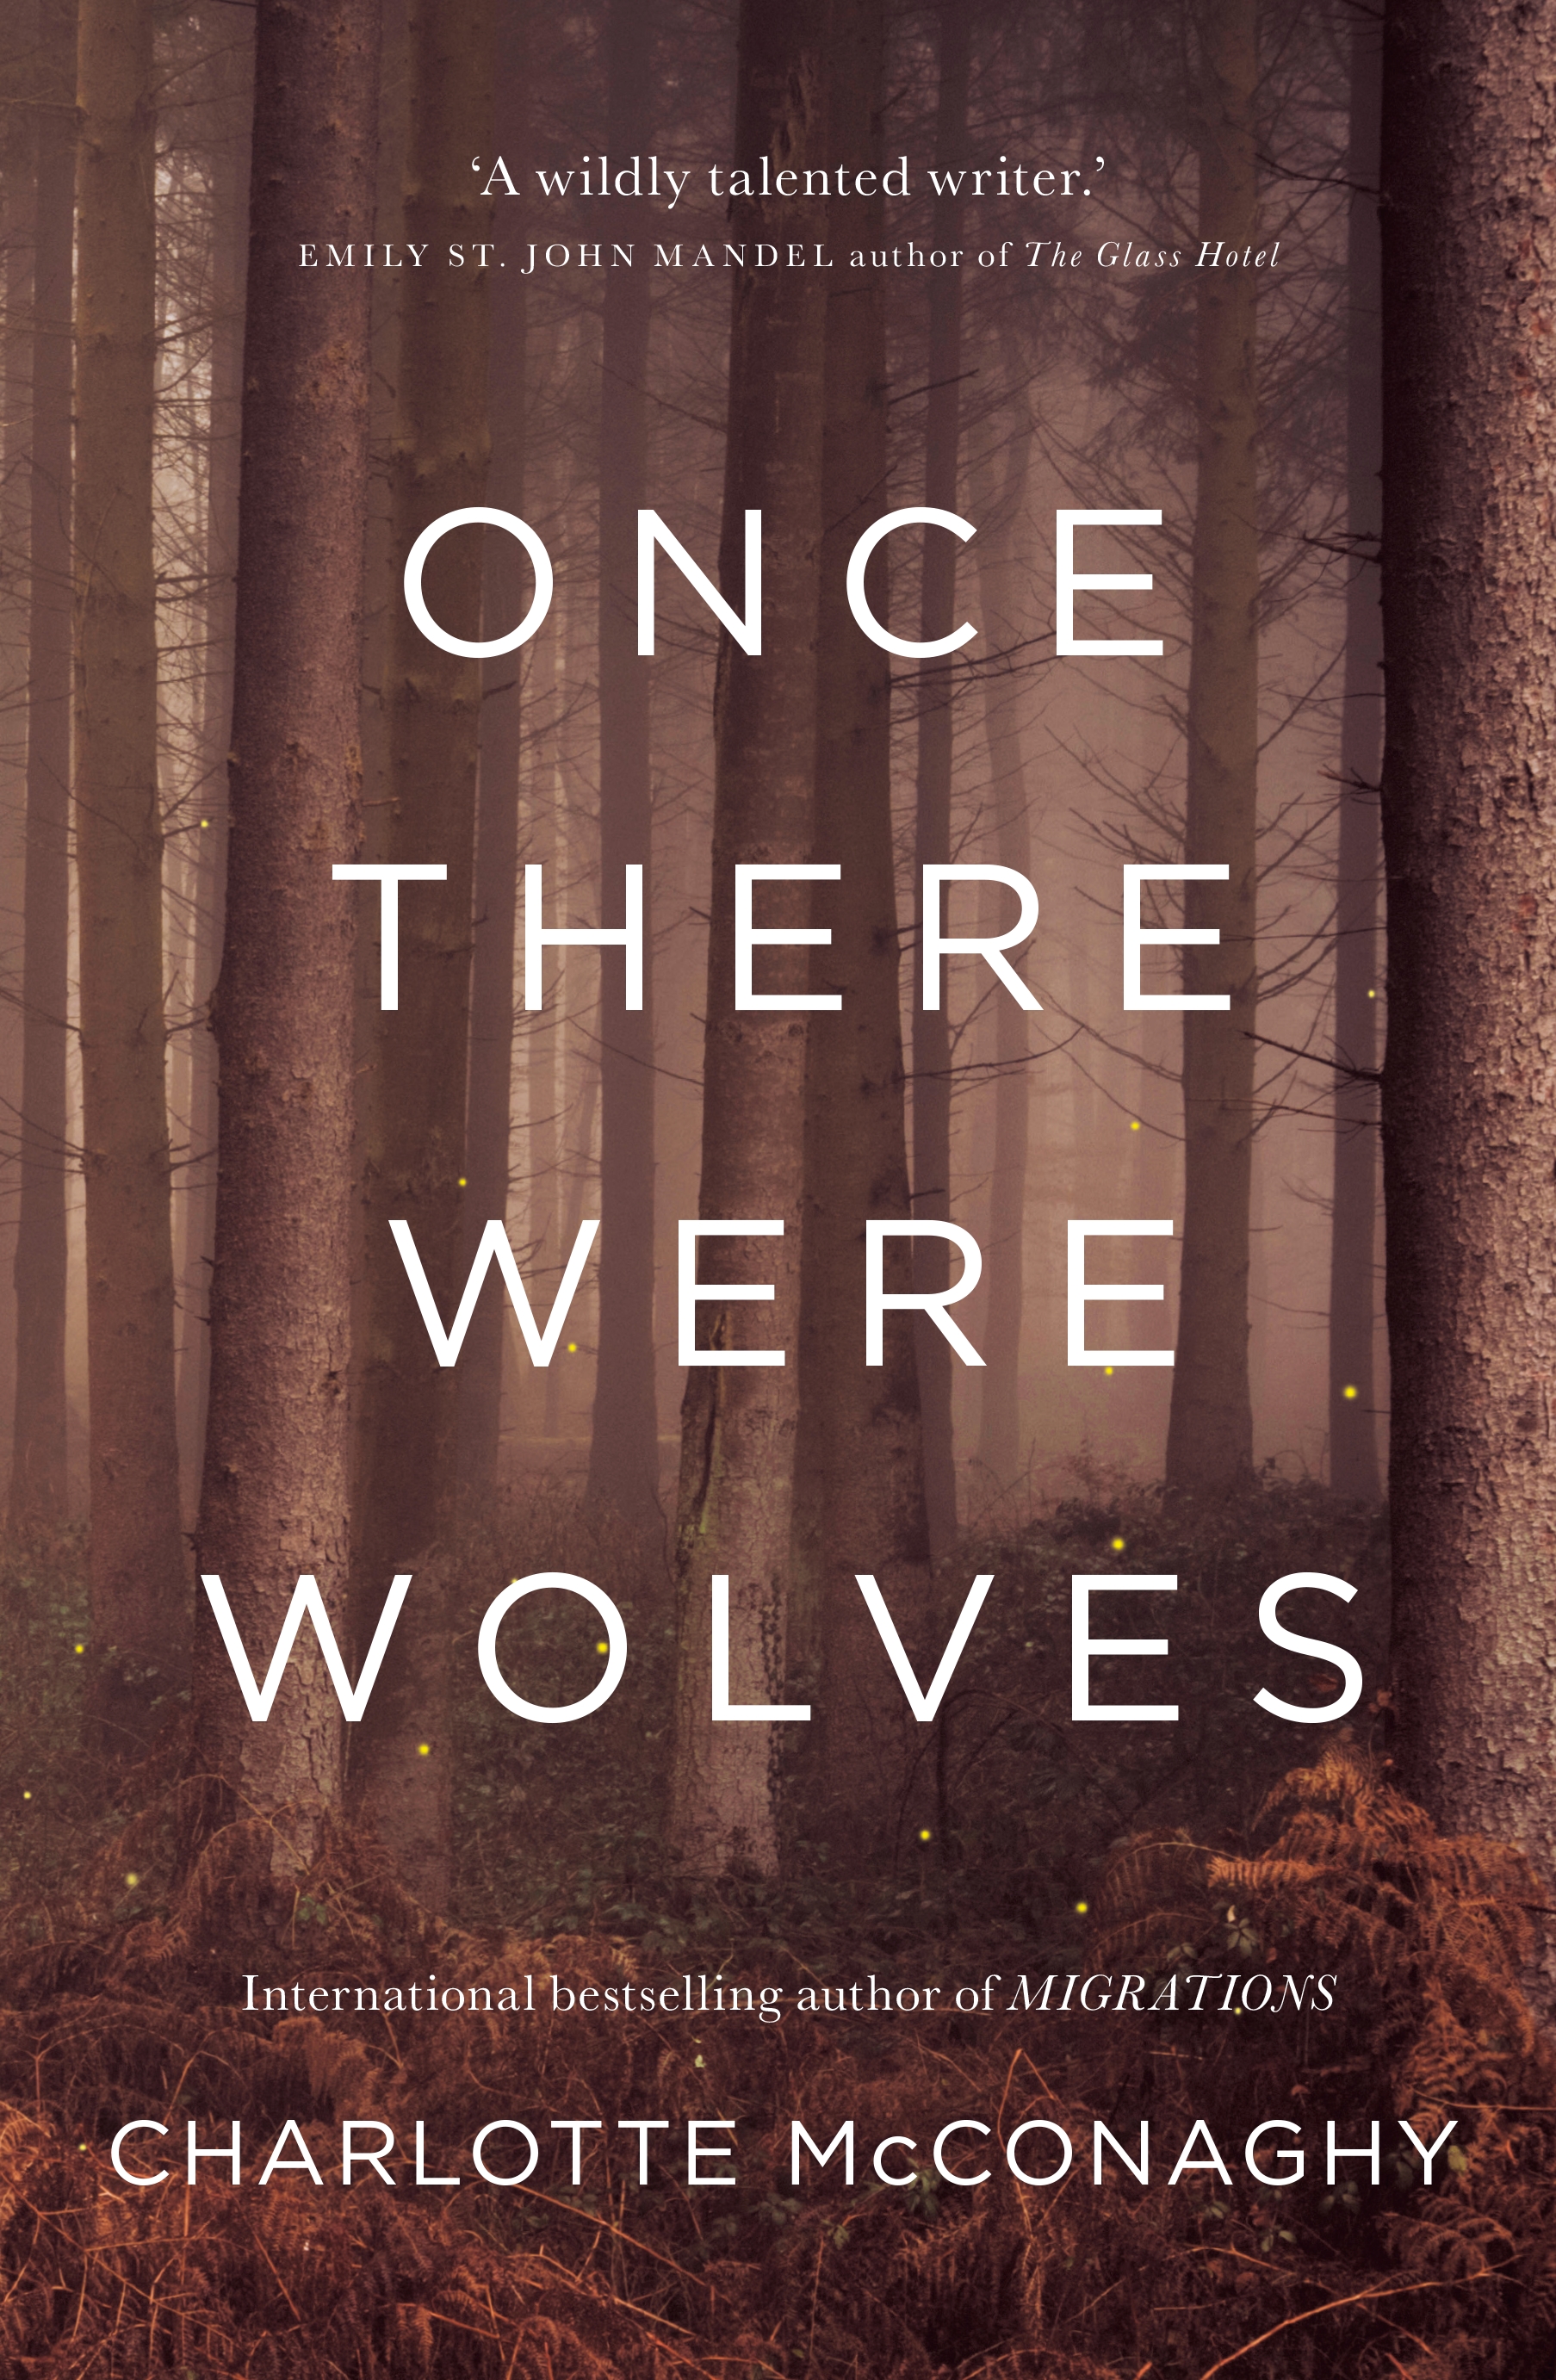 The book cover of Once There Were Wolves by Charlotte McConaghy, a faded image of a forest